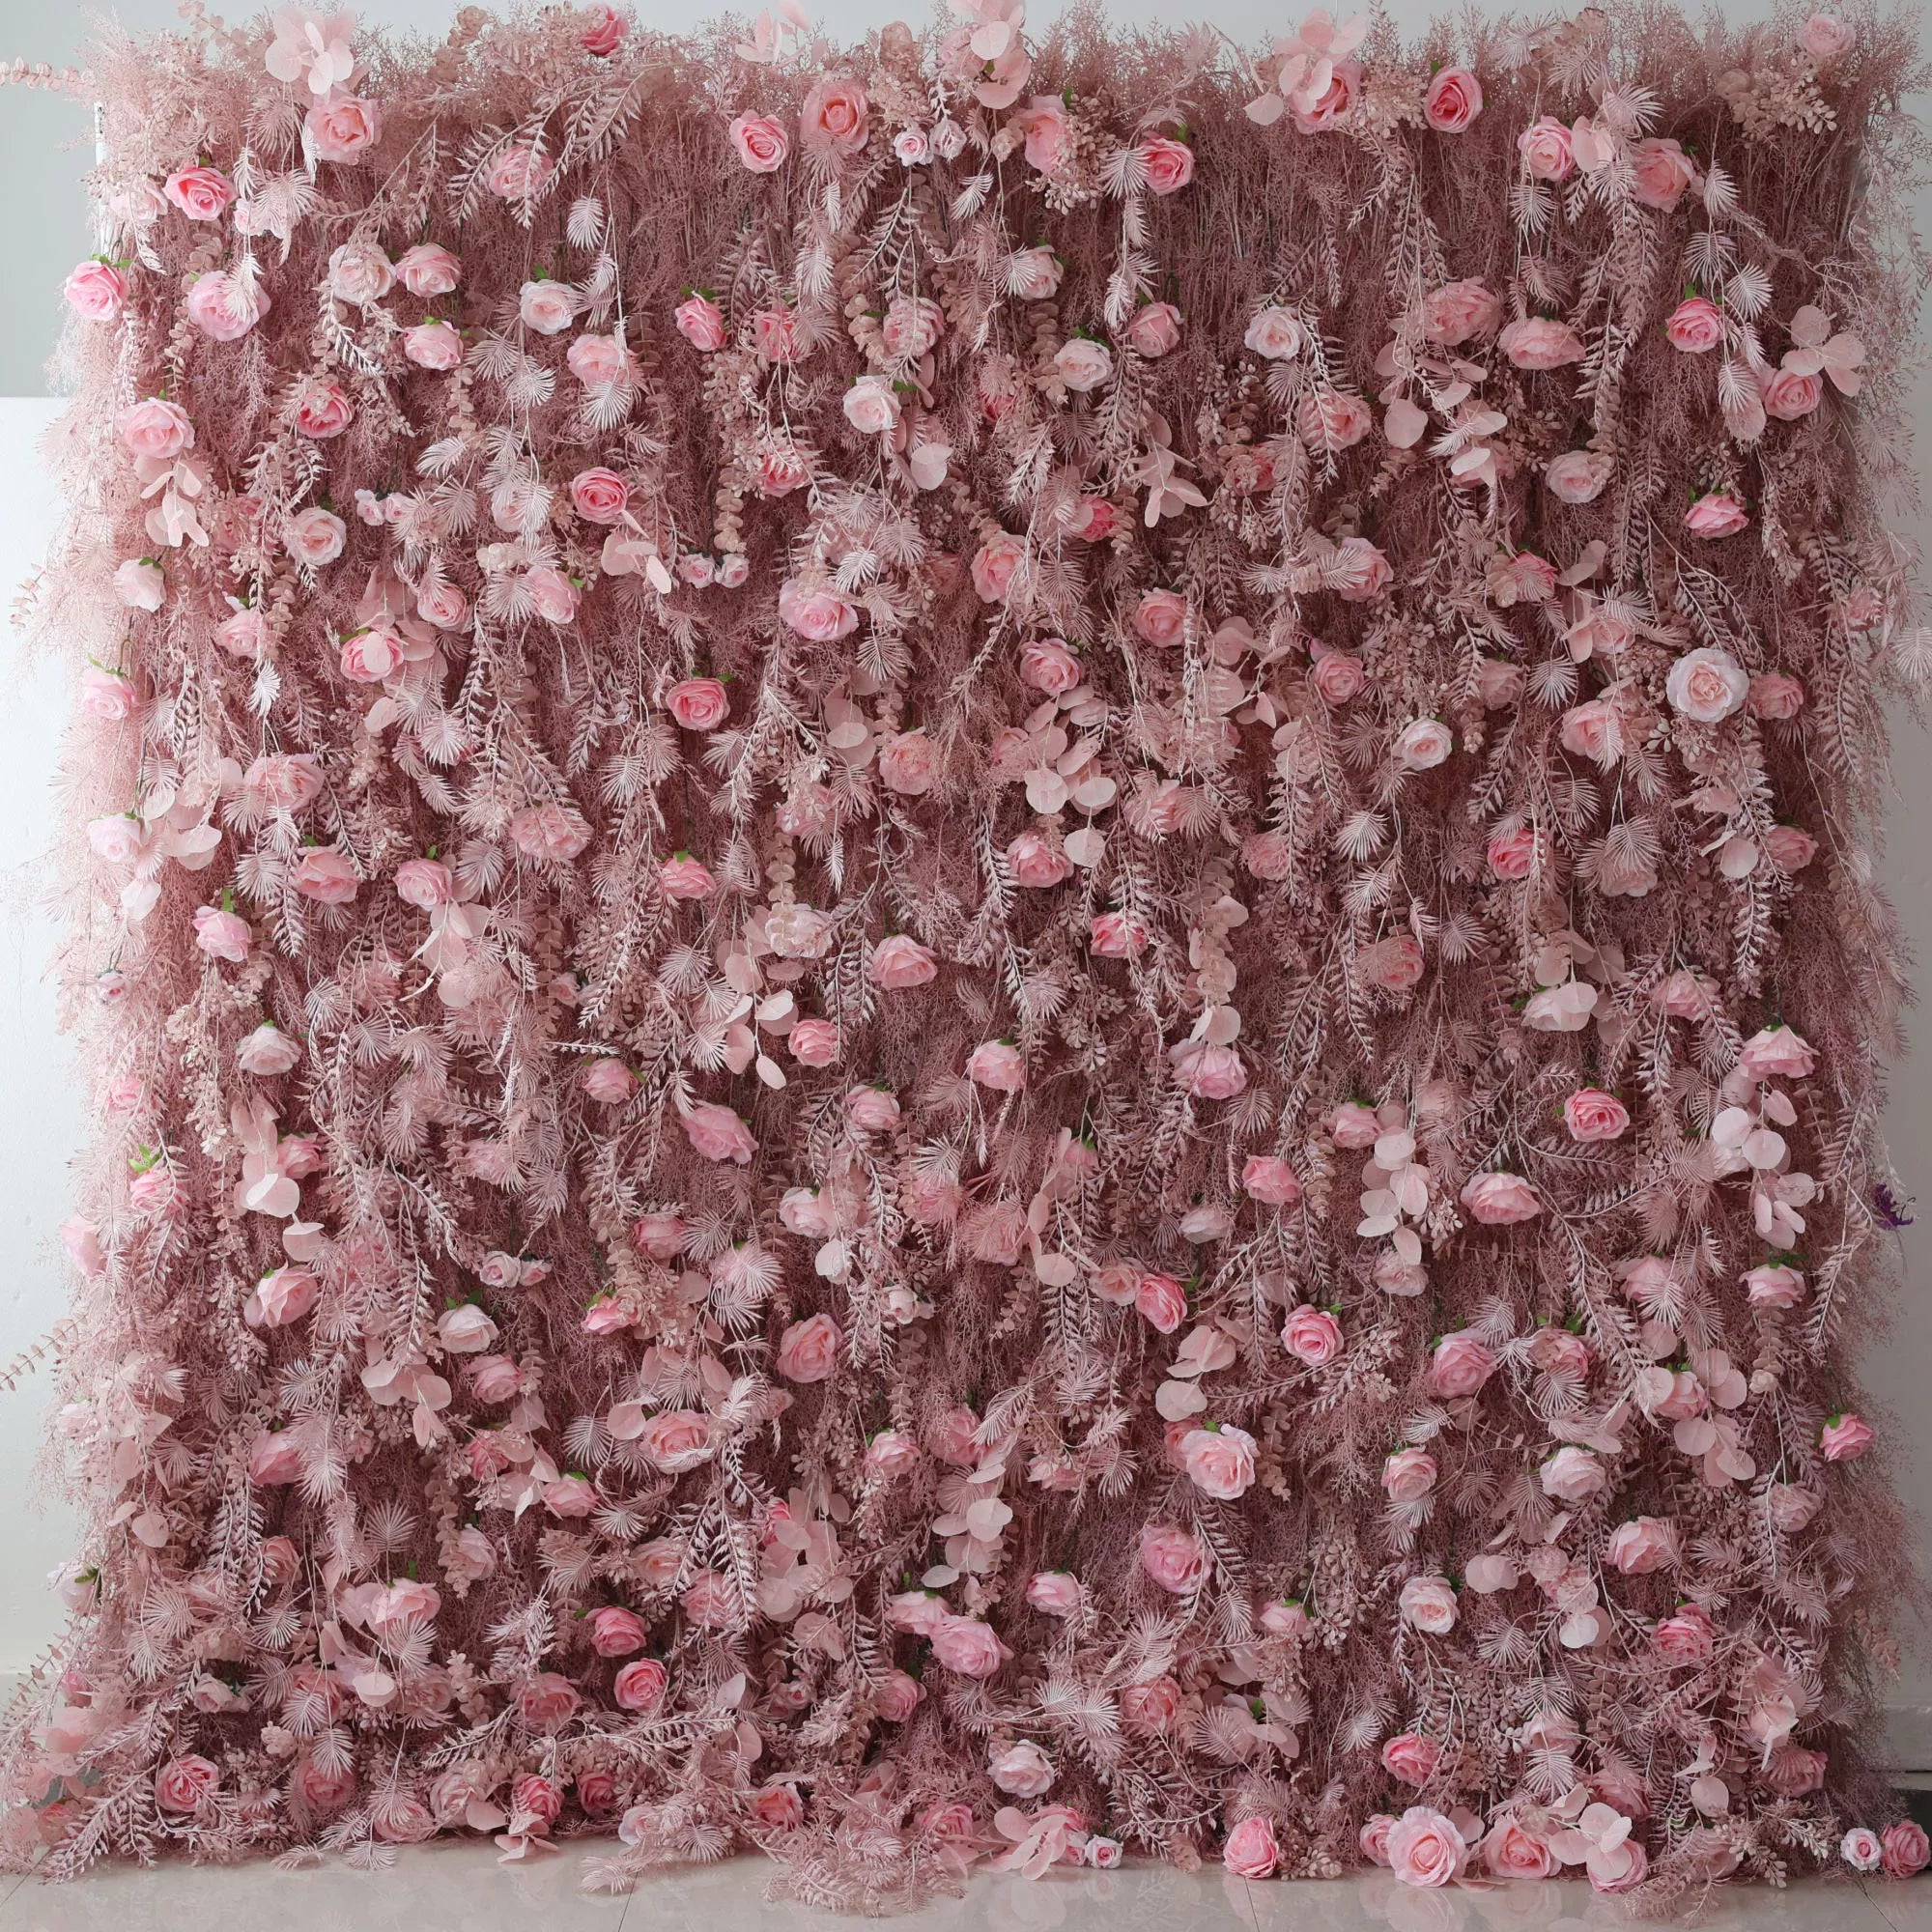 Blushing Pink Blossom Wall with Frosted Fern Accents: Romance Meets Whimsy for Sophisticated Celebrations-VF-202-3